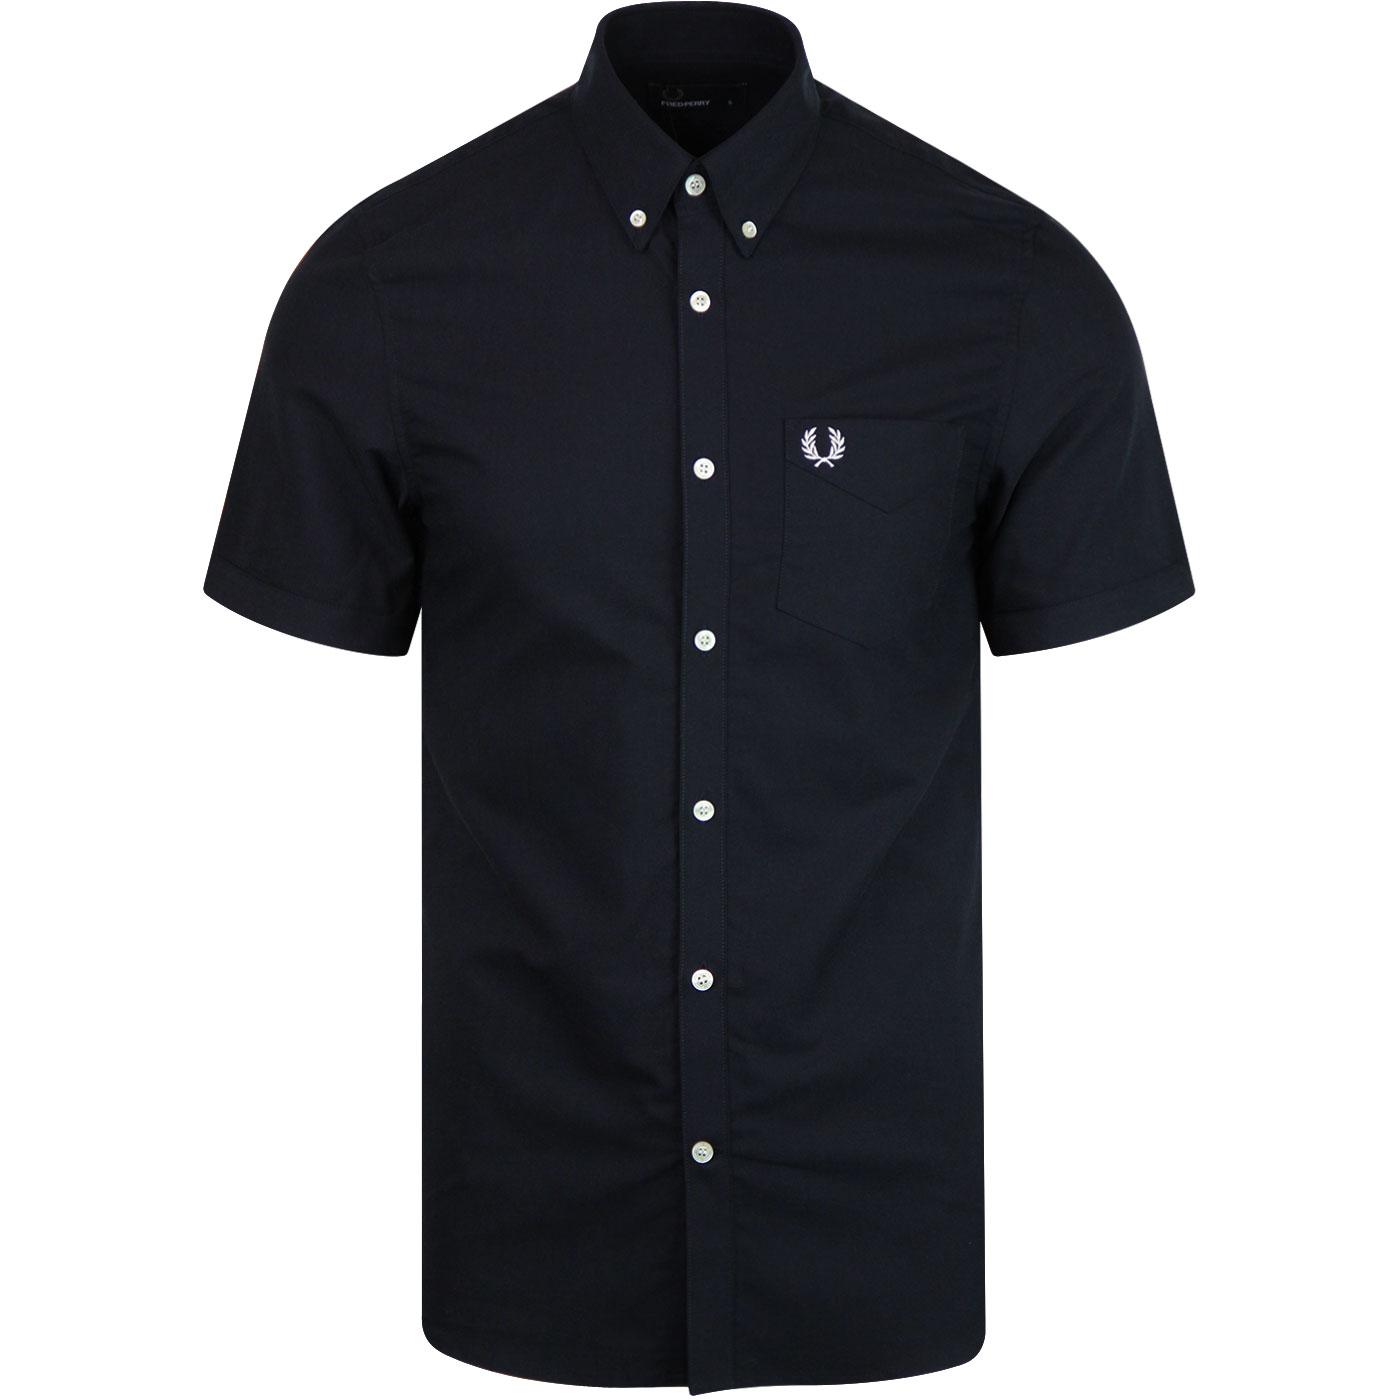 FRED PERRY Classic Short Sleeve Oxford Shirt NAVY